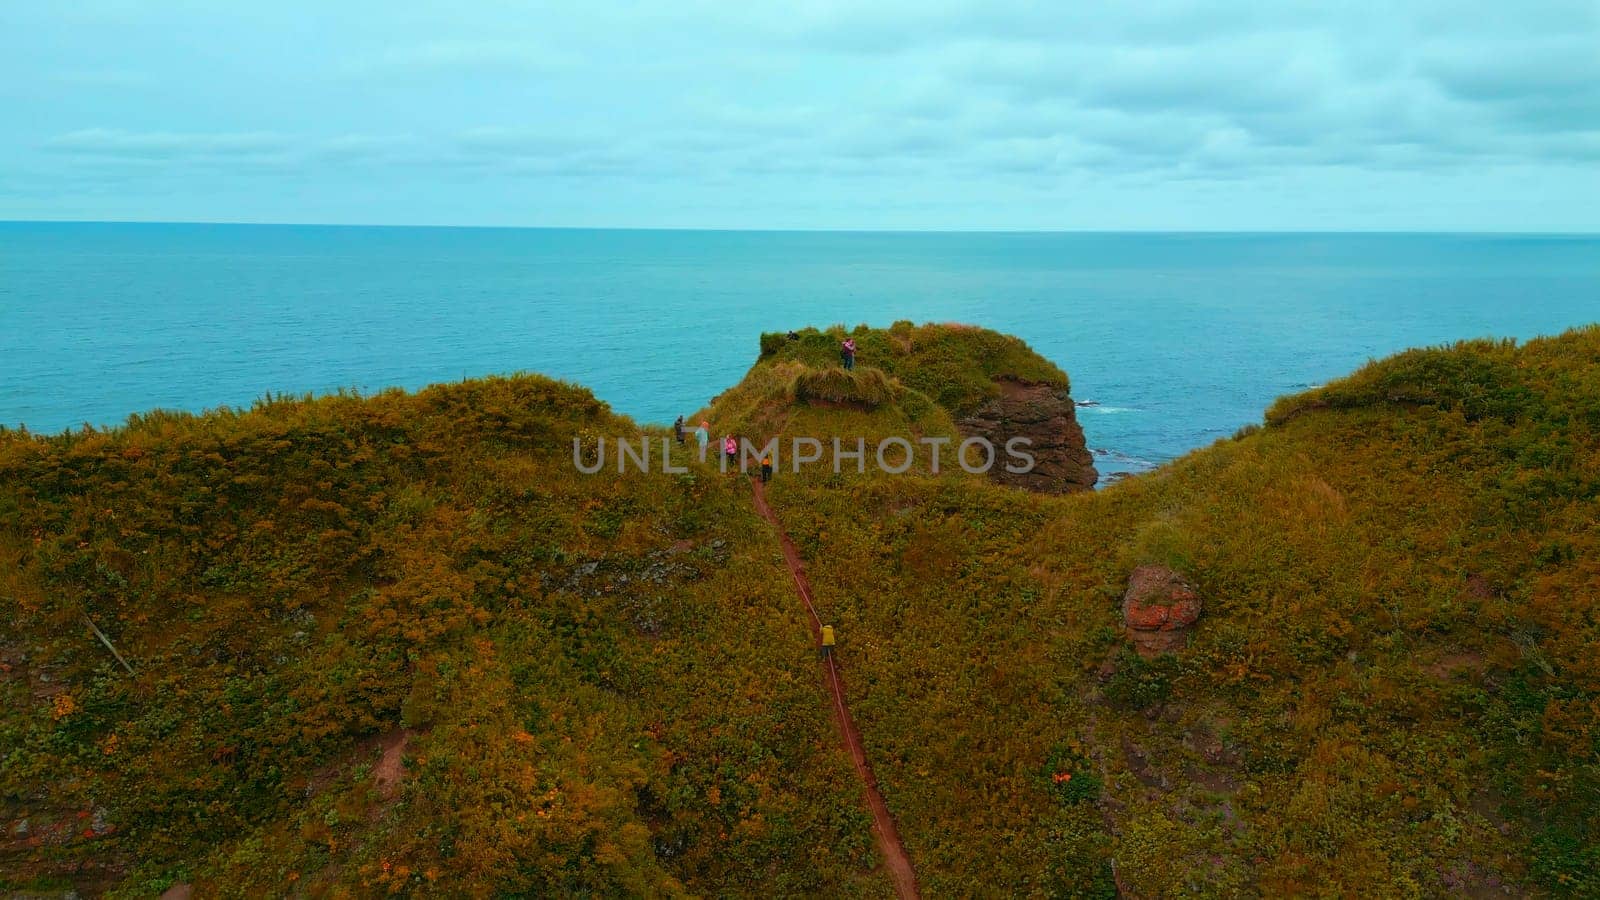 Top view of group of people standing on edge of coast. Clip. Tourists are standing on rocky shore overlooking sea horizon. Tourists on rock with beautiful grass by sea on cloudy day.